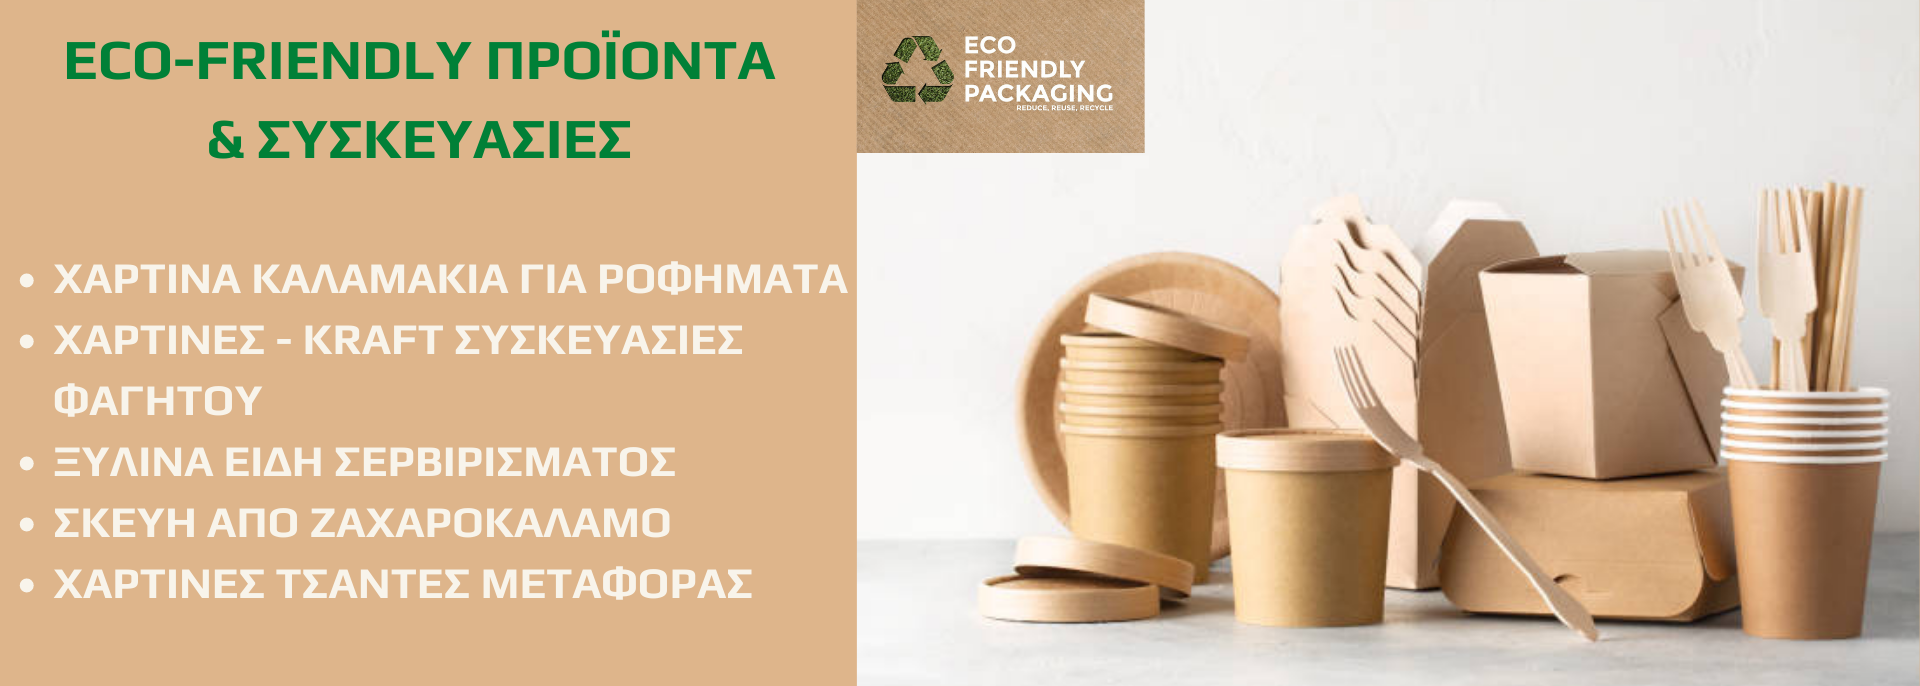 eco_friendly_packaging